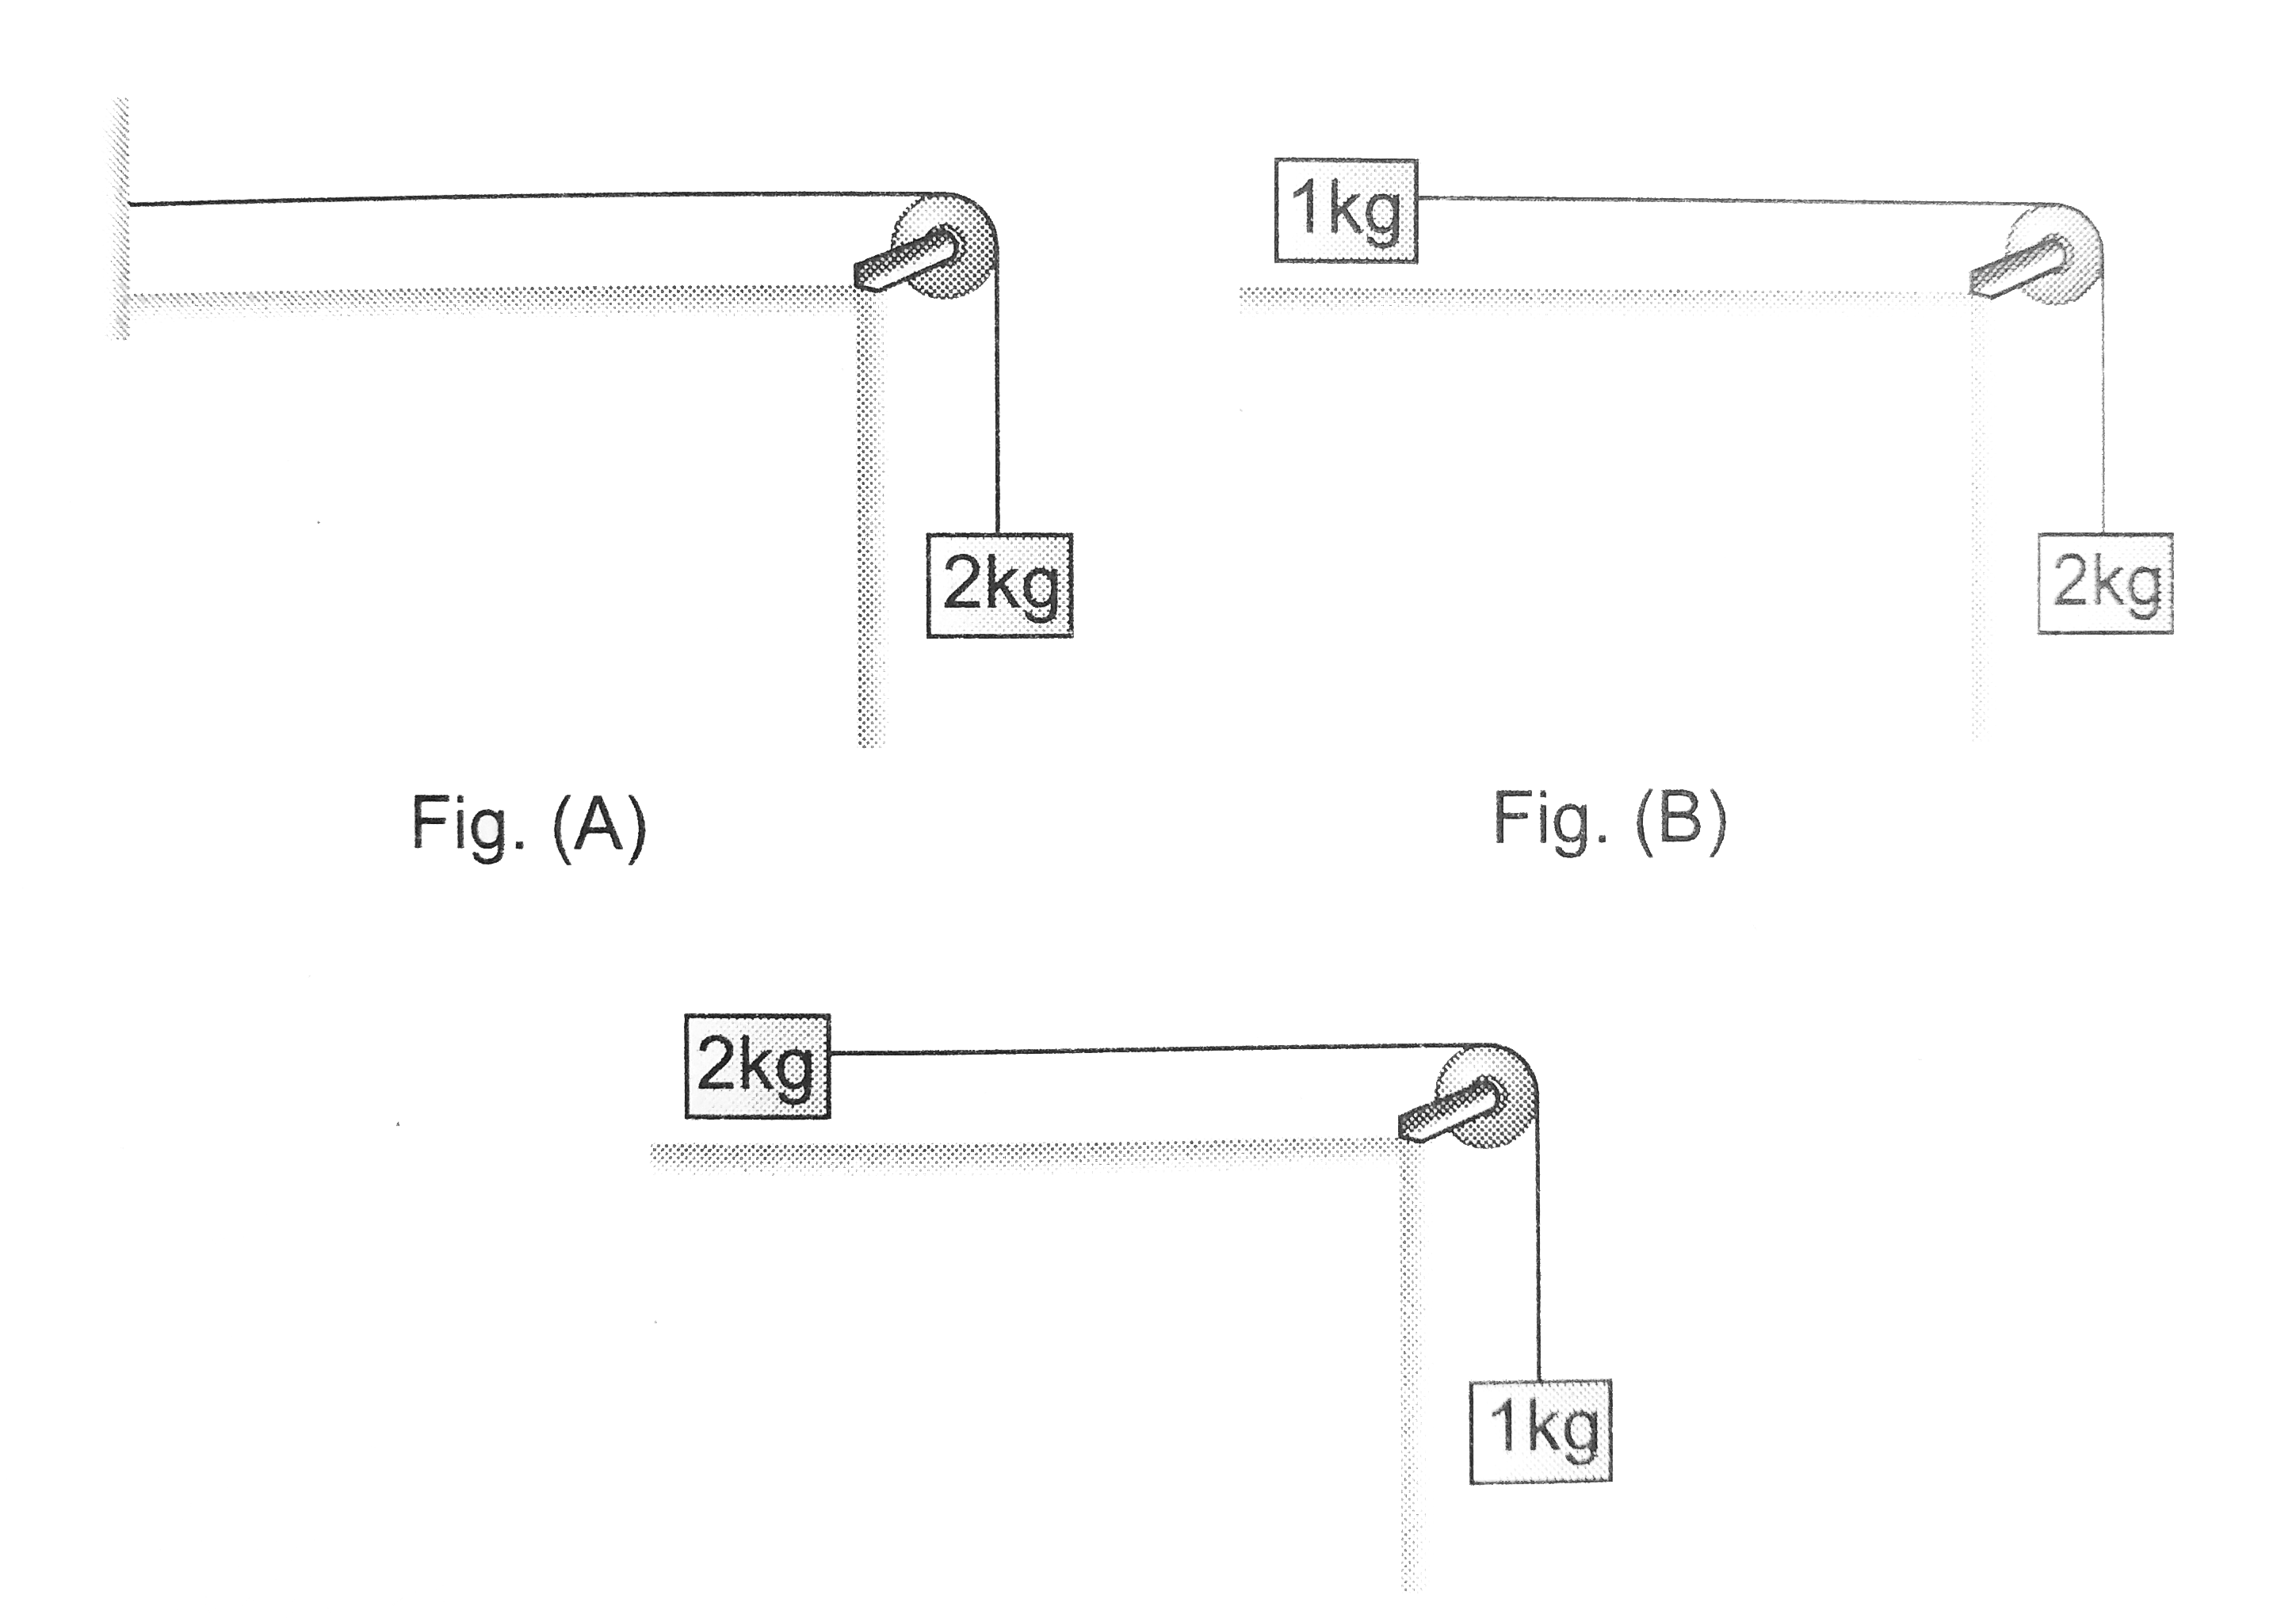 Consider the three cases given in figures shown. Assume the friction to be absent everywhere and the pulleys to be light, the string connecting the blocks to other block or fixed vertical wall to be light and inextensible. Let T(A) , T(B) and T(C) be the tension in the strings in figure A , figure B and figure C respectively. Then pick the correct comparison between the given tension (for the instant shown) from options below.